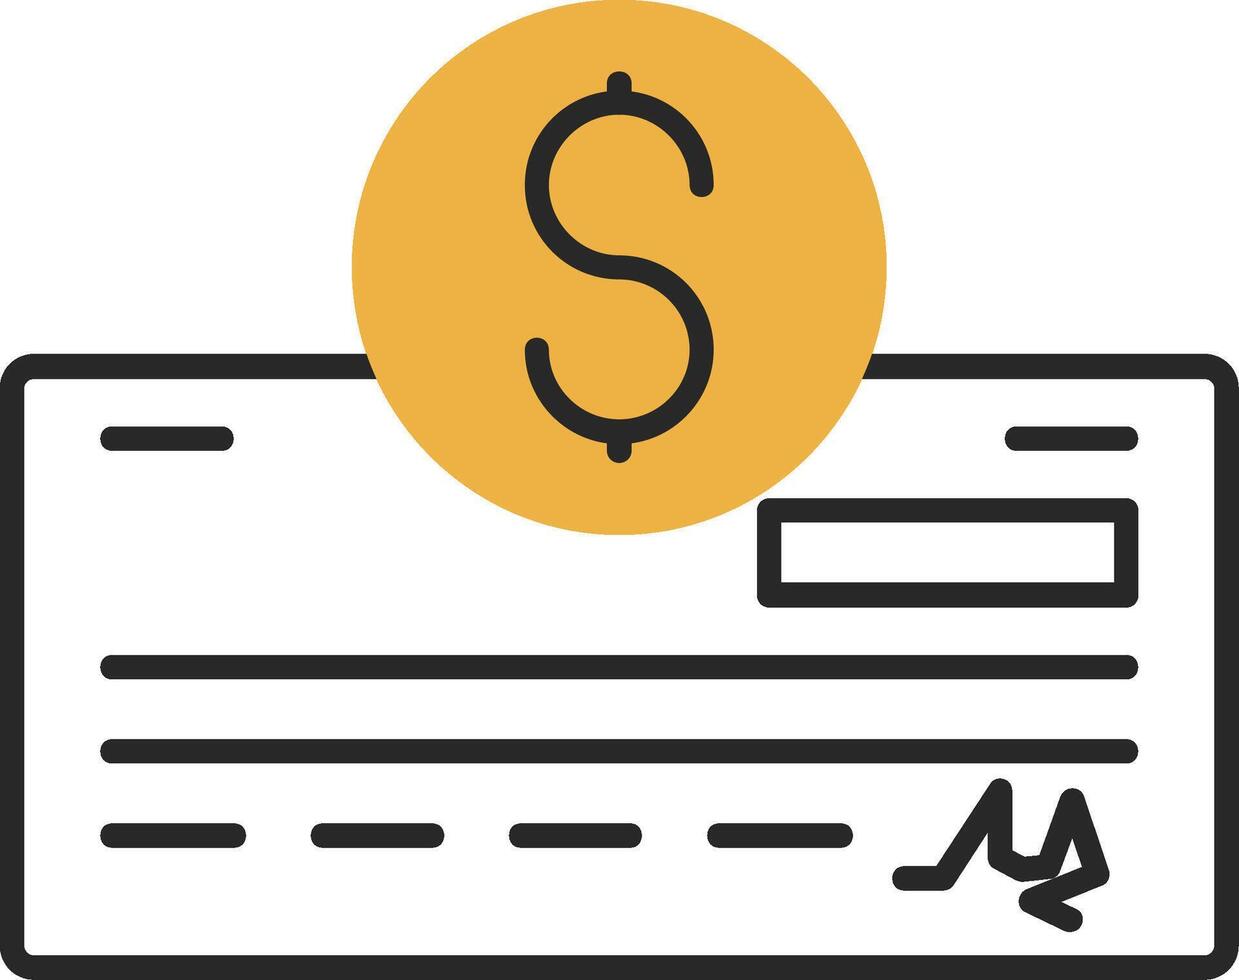 Pay Check Skined Filled Icon vector